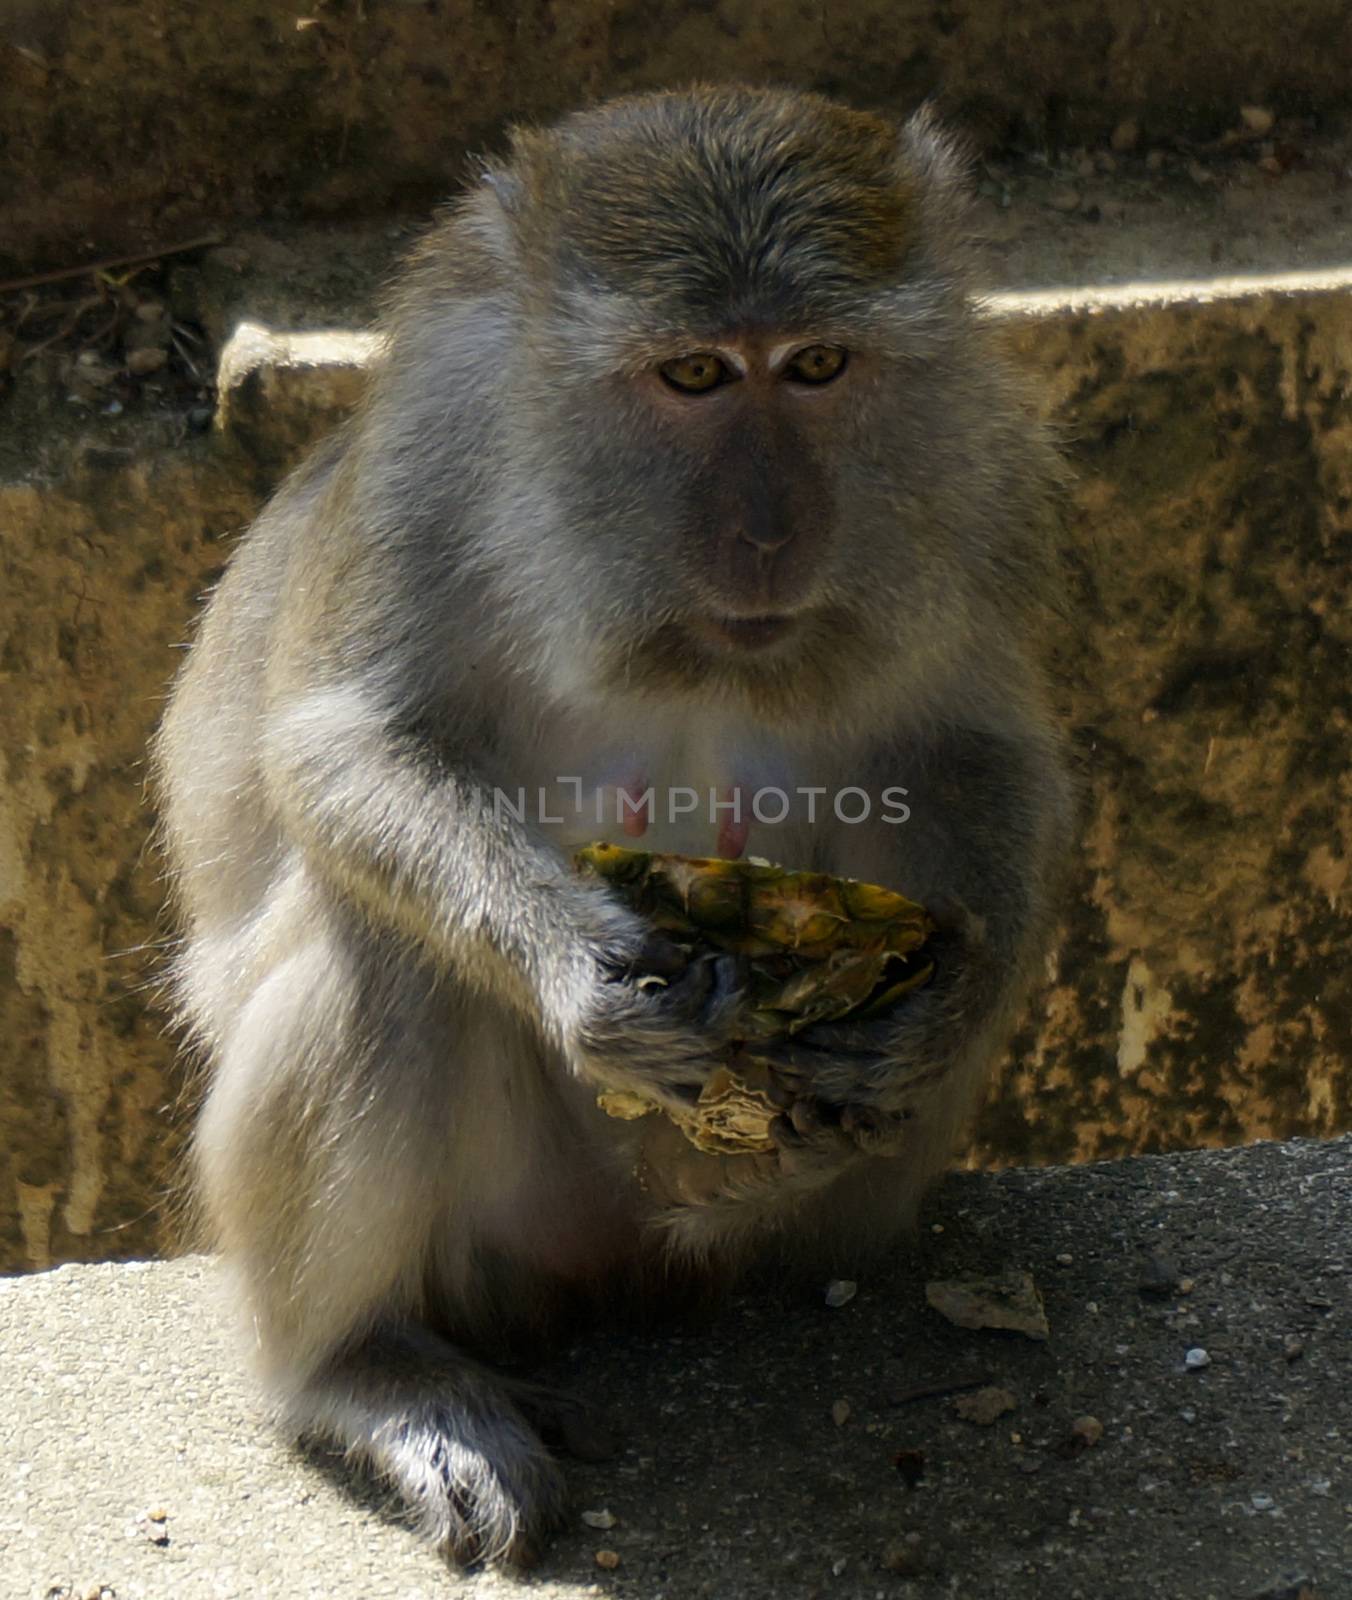 A Macaque monkey also known as Rhesus Monkey . by mcherevan